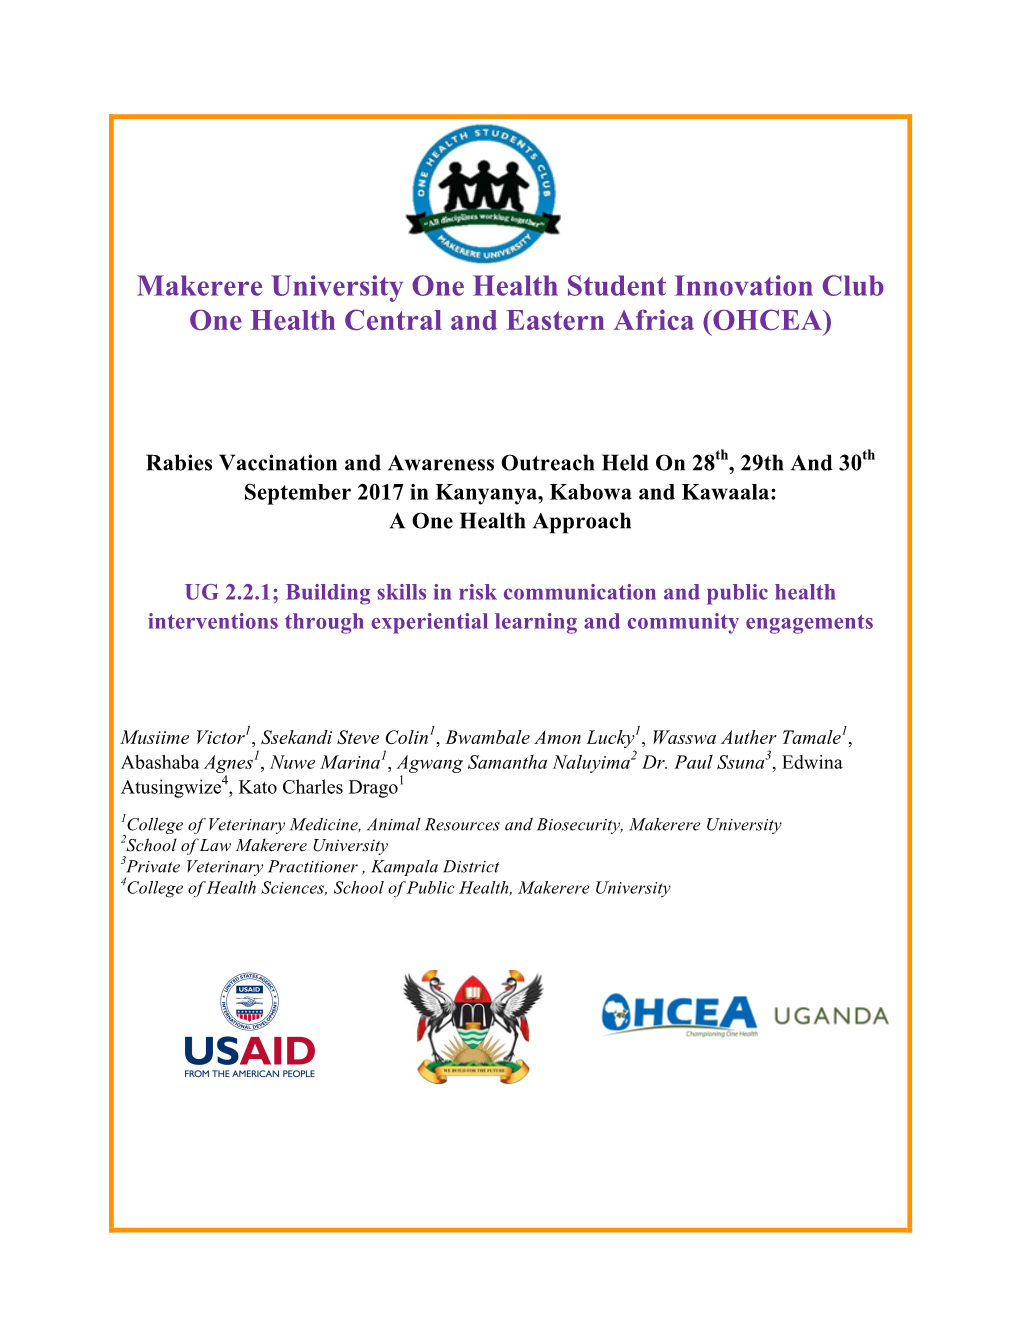 Makerere University One Health Student Innovation Club One Health Central and Eastern Africa (OHCEA)